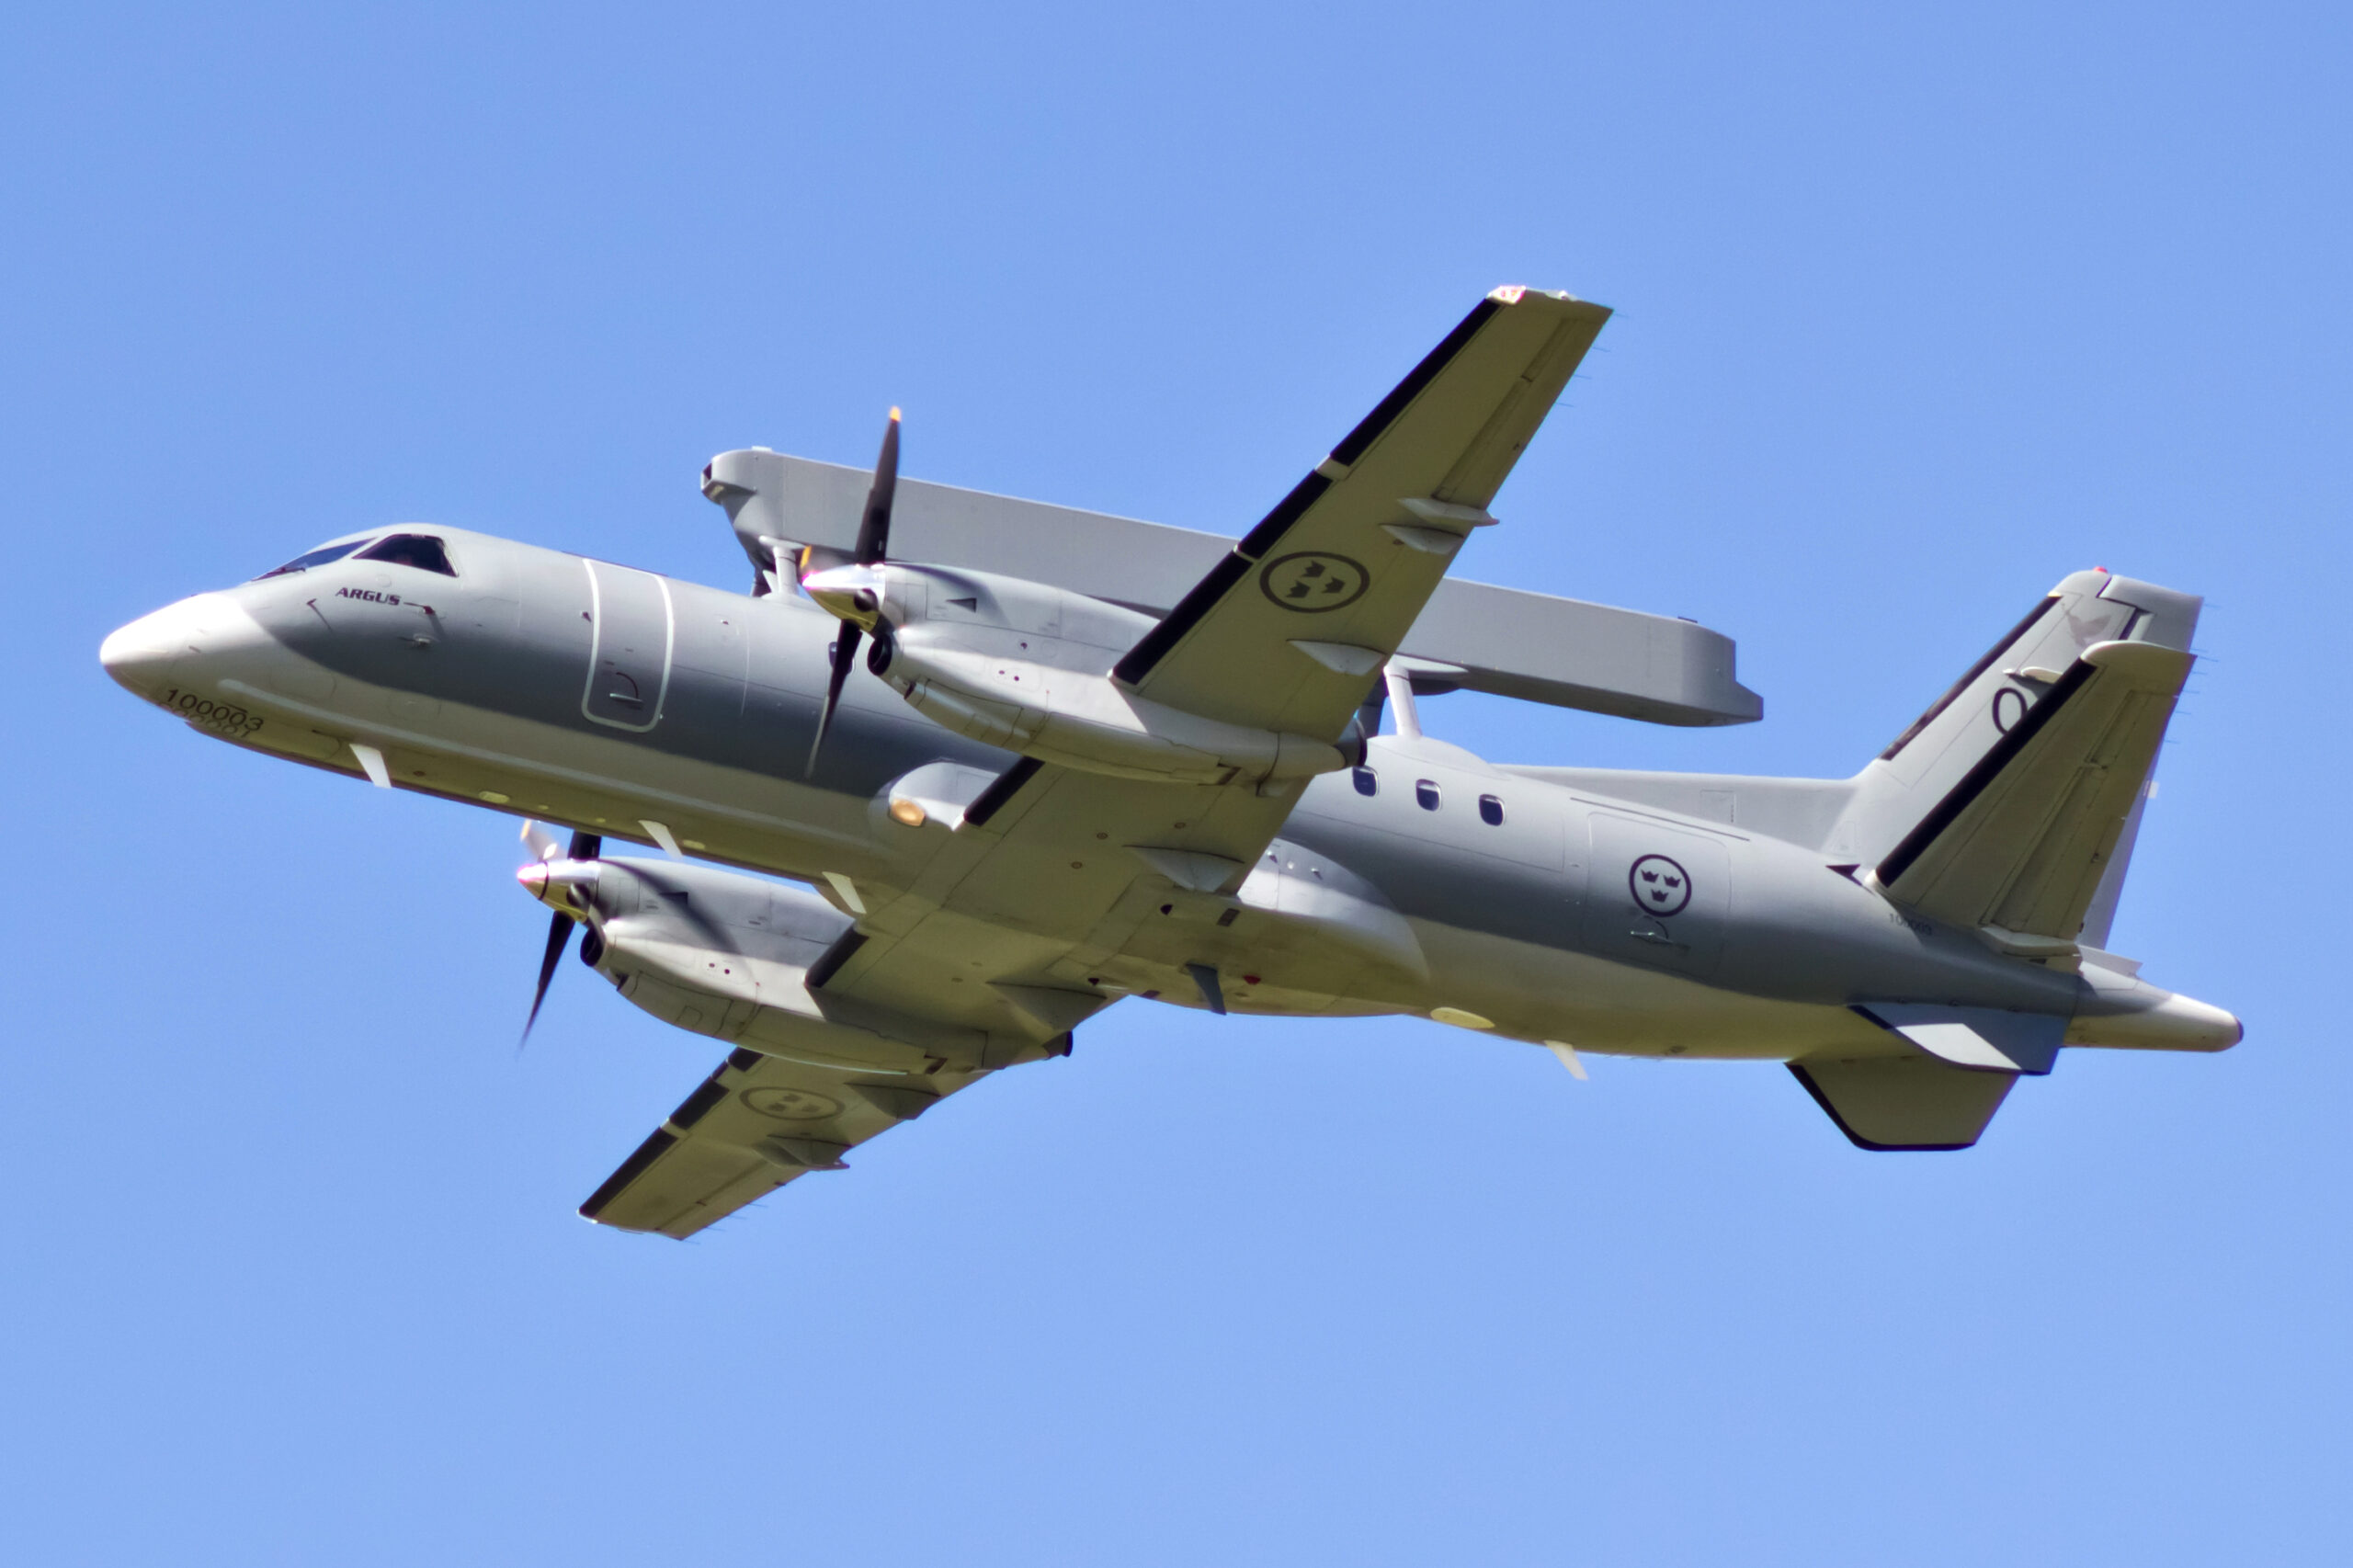 A Saab 340 aerial early warning and control plane is seen flying in clear blue skies. Its long, rectangular radar system is seen connected and propped up parallel to its body. The aircraft is painted gray. The photo was taken underneath the plane.